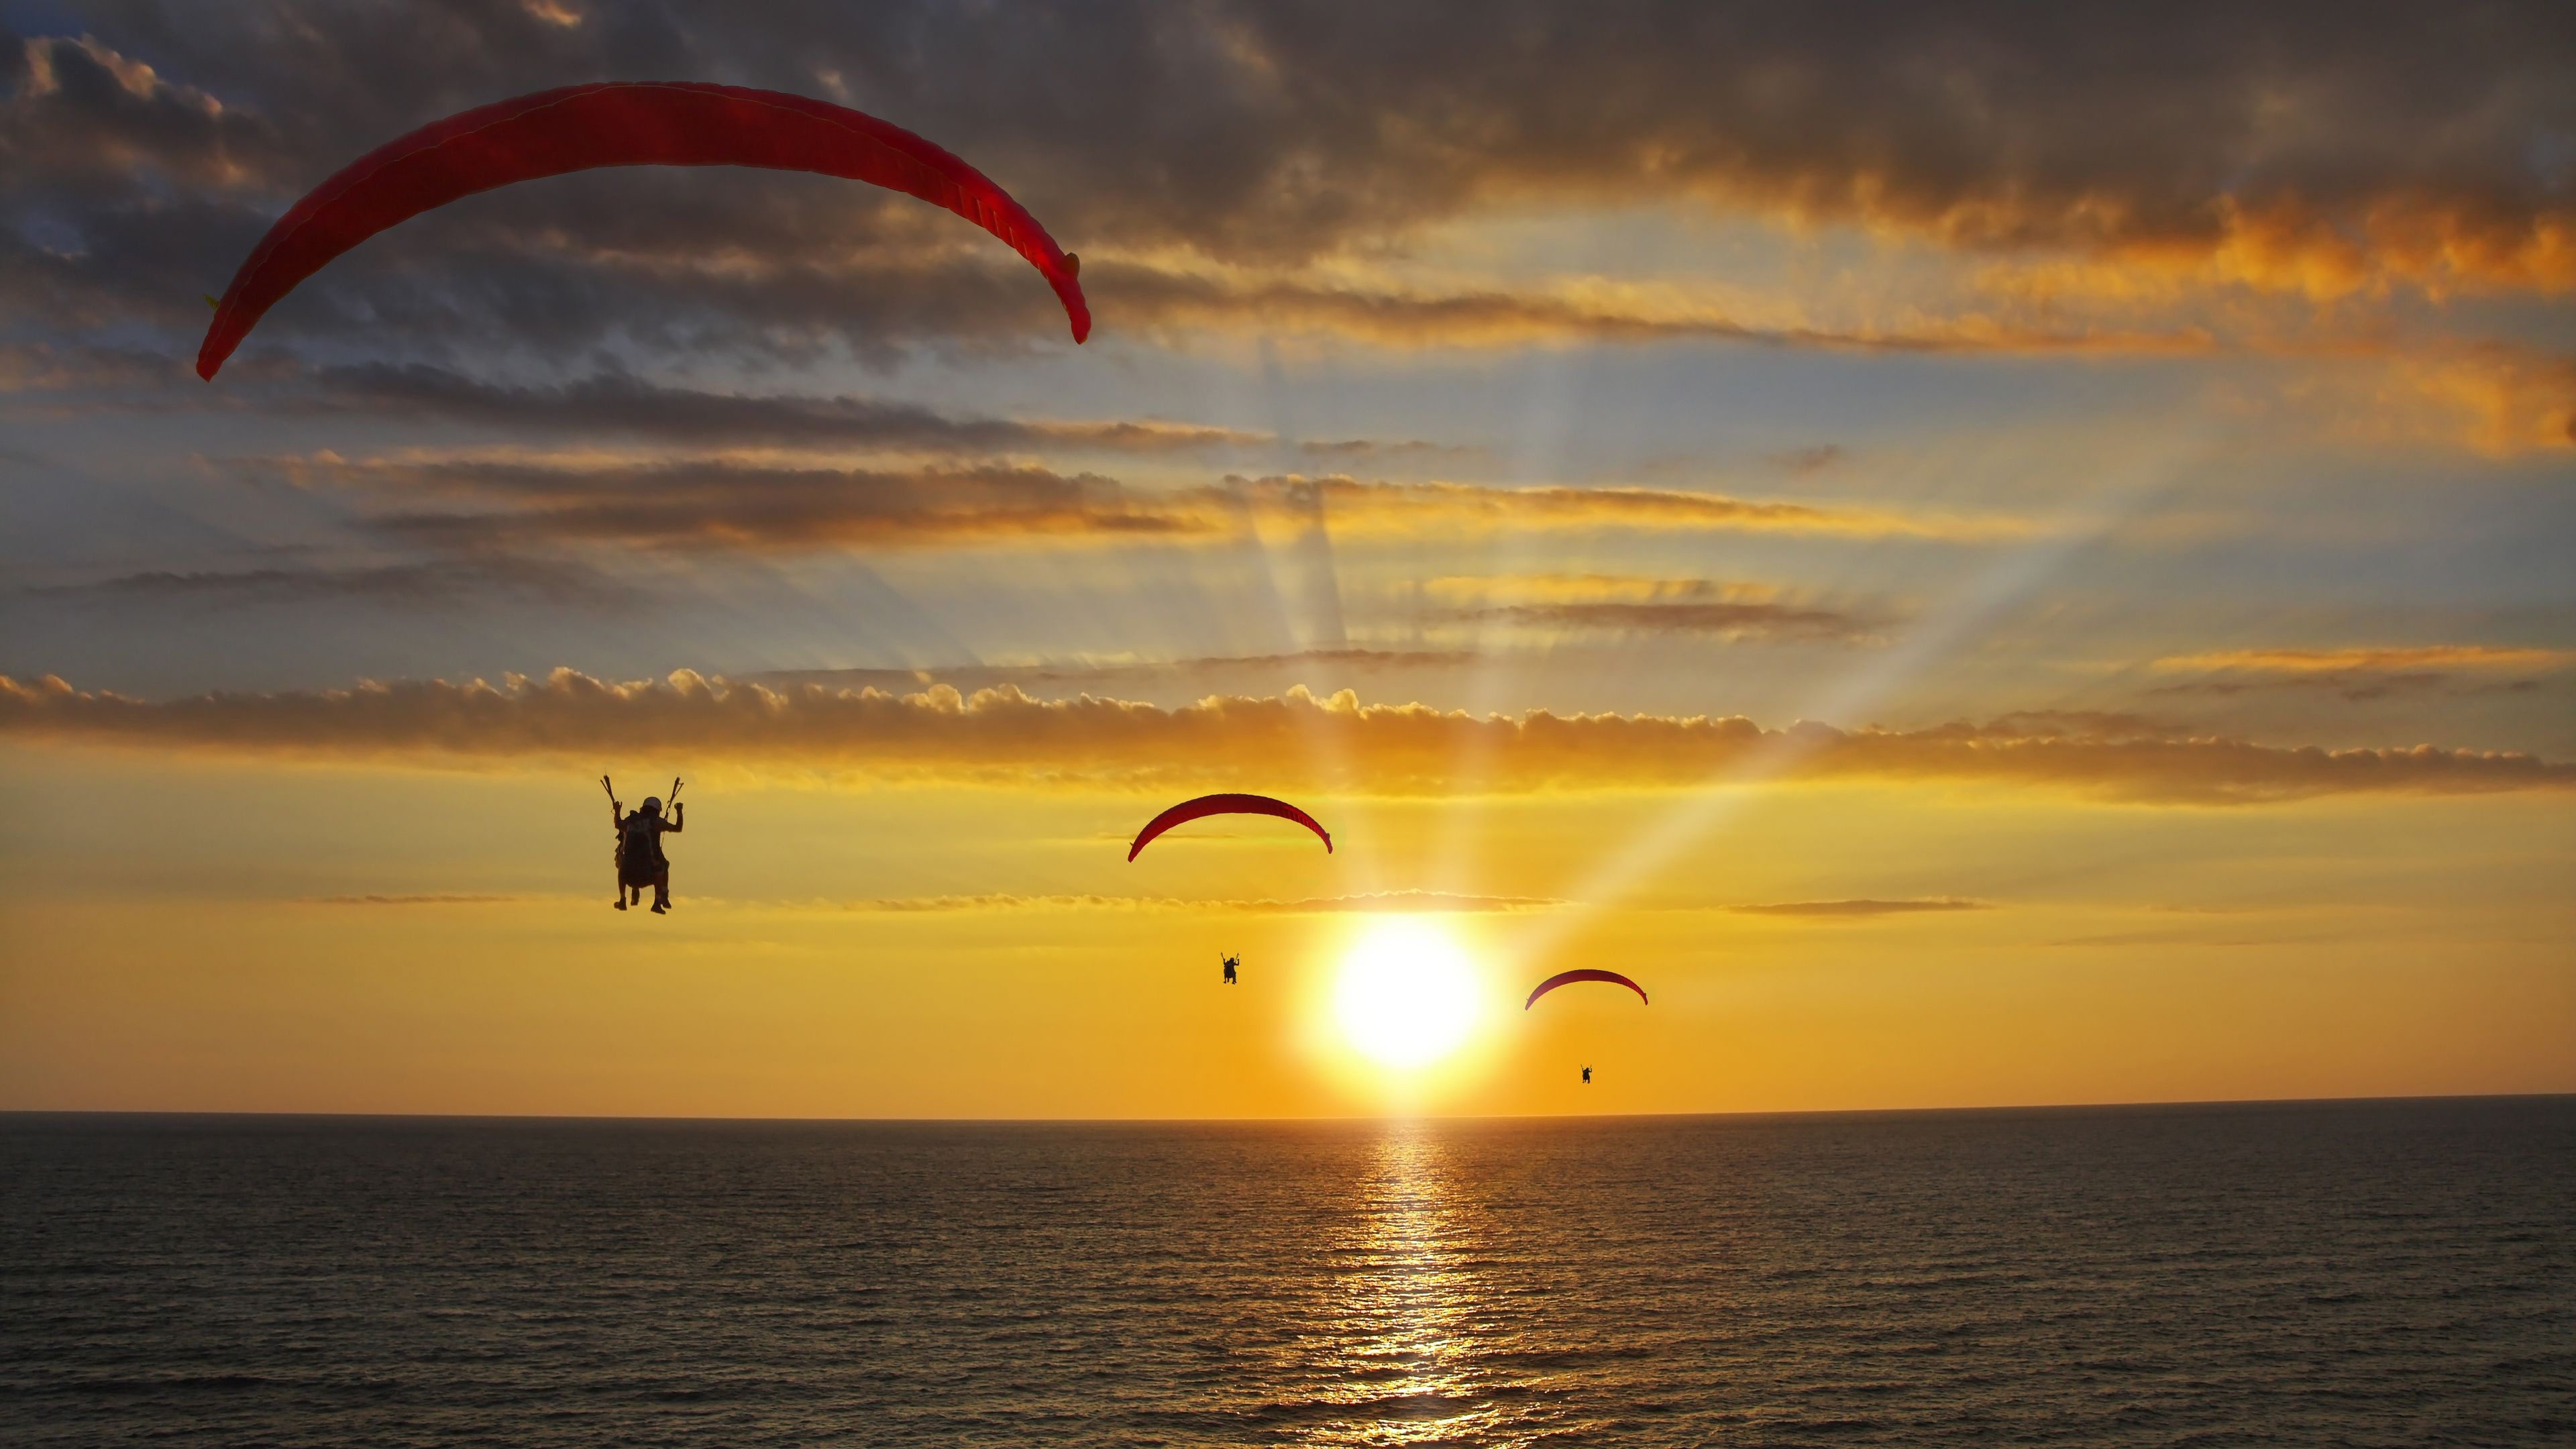 Paragliding: Operated Parachutes Above The Sea, Competitive adventure sport. 3840x2160 4K Background.